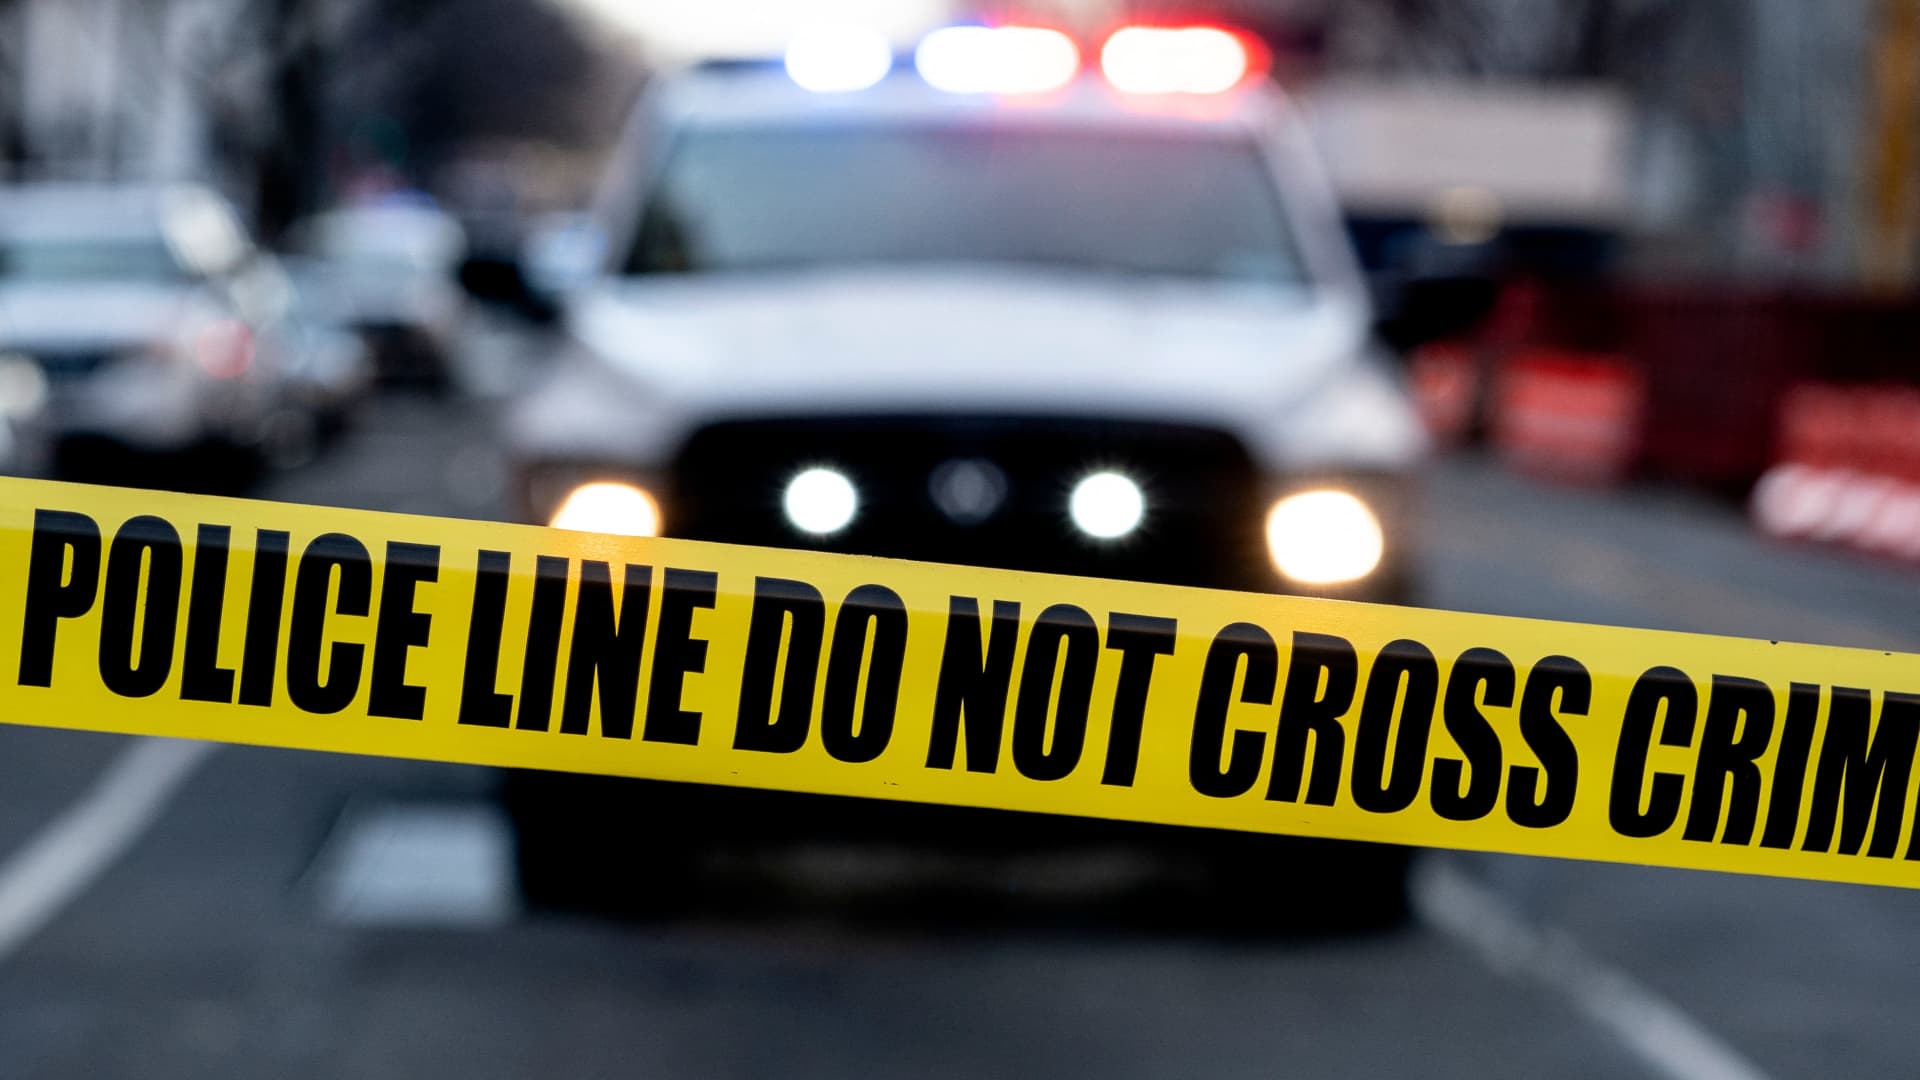 Gunfight at an Arkansas car show leaves 1 dead, 27 wounded